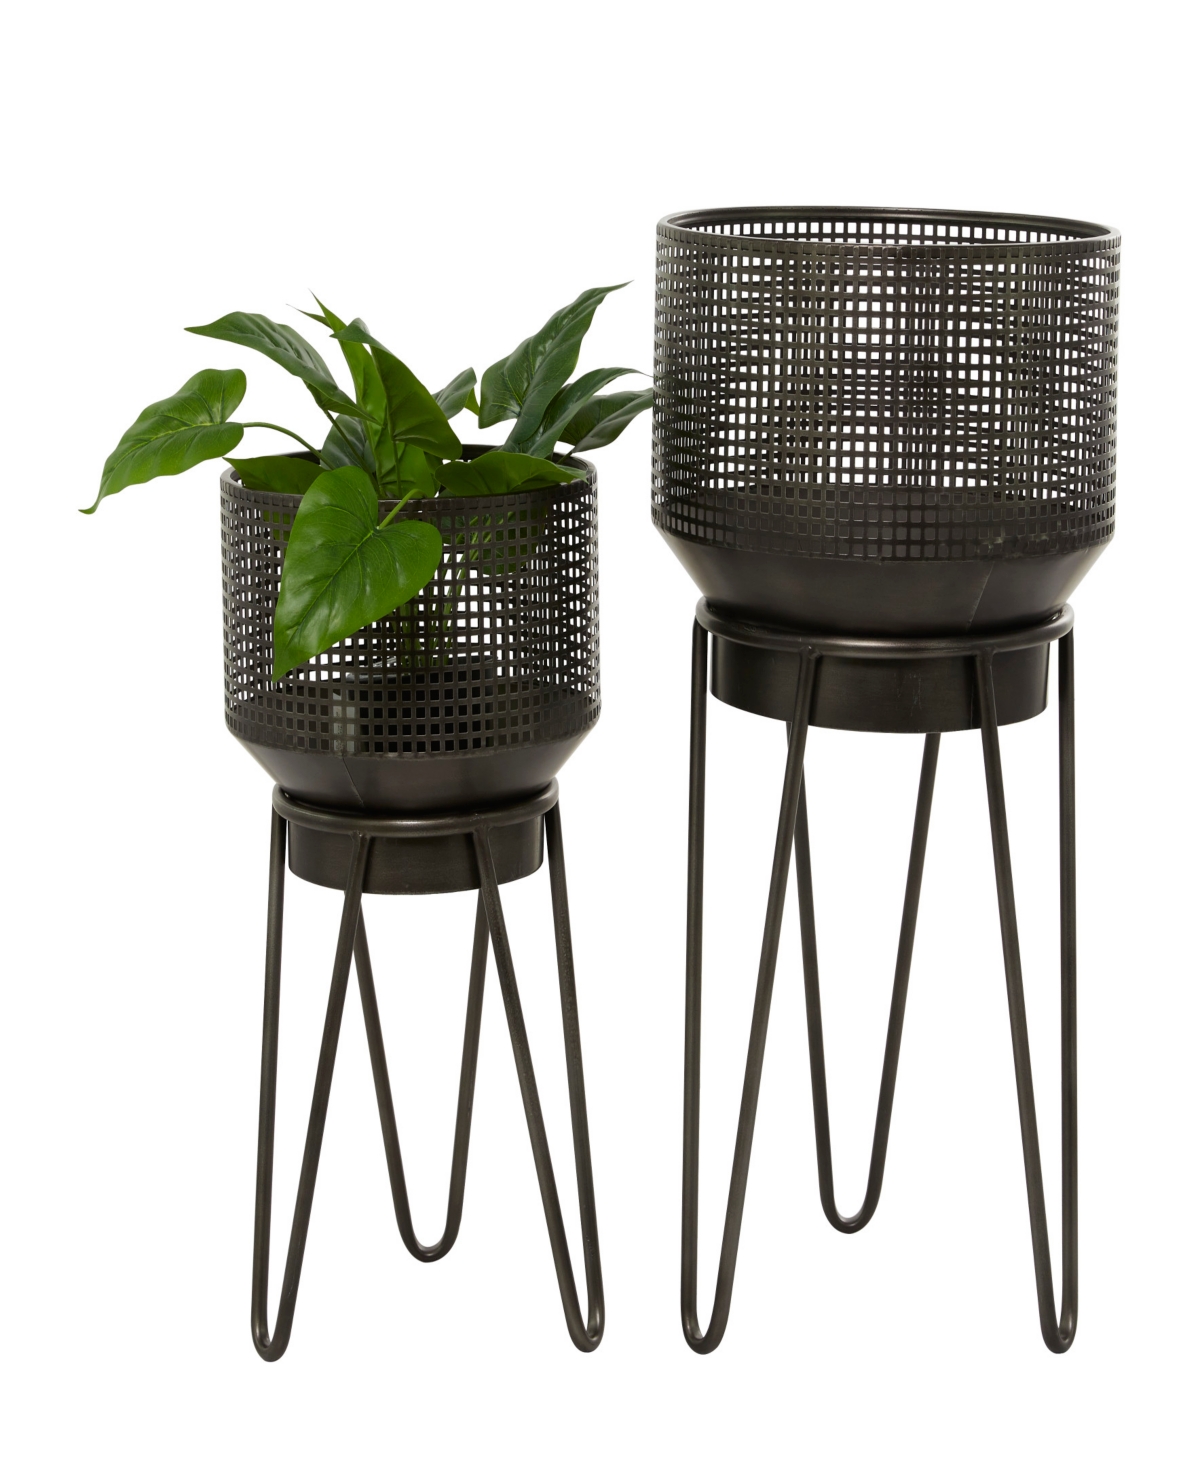 Black Metal Indoor Outdoor Planter with Removable Stand Set of 2 - Black